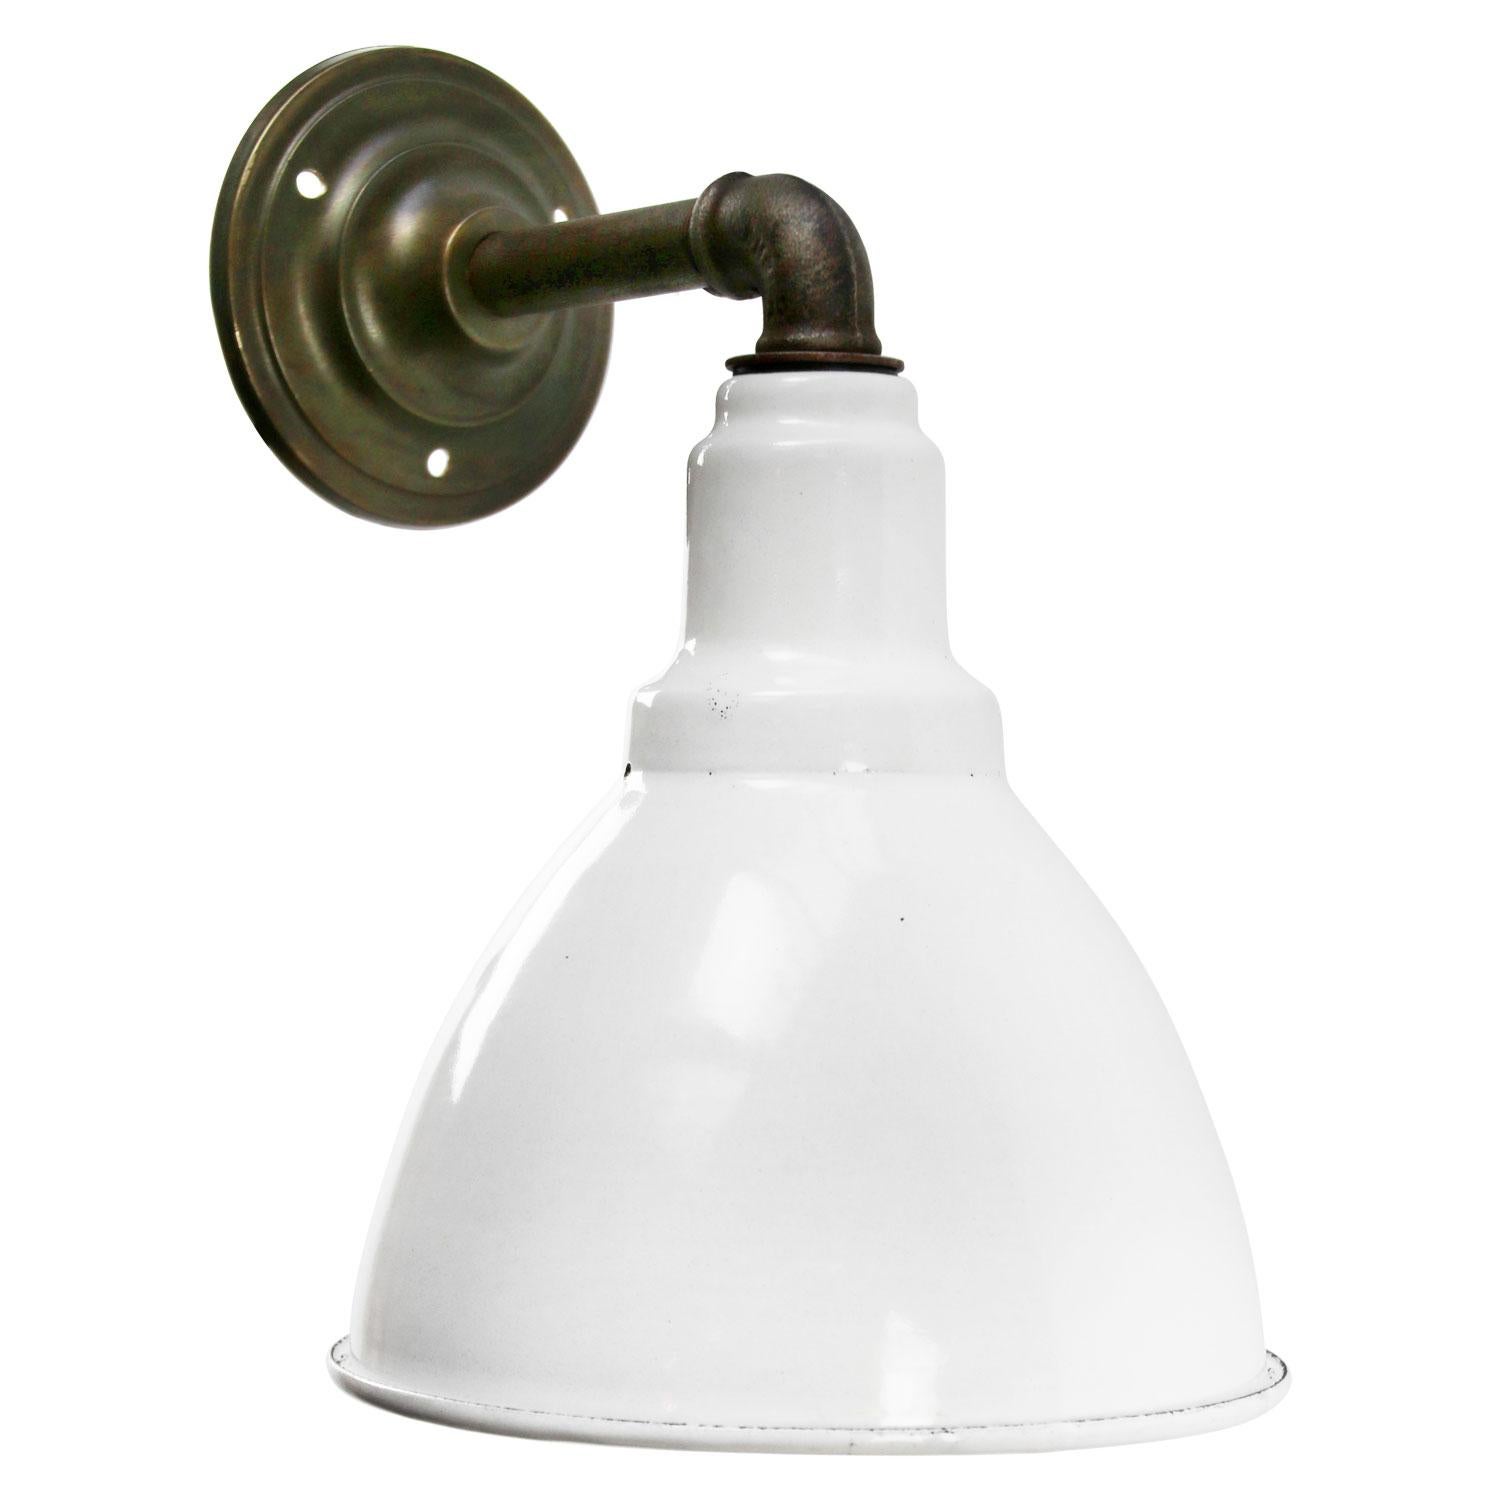 Factory wall light
White enamel shade, cast iron arm and brass wall plate

Diameter cast iron wall piece: 10 cm, 2 holes to secure

Weight: 1.80 kg / 4 lb

Priced per individual item. All lamps have been made suitable by international